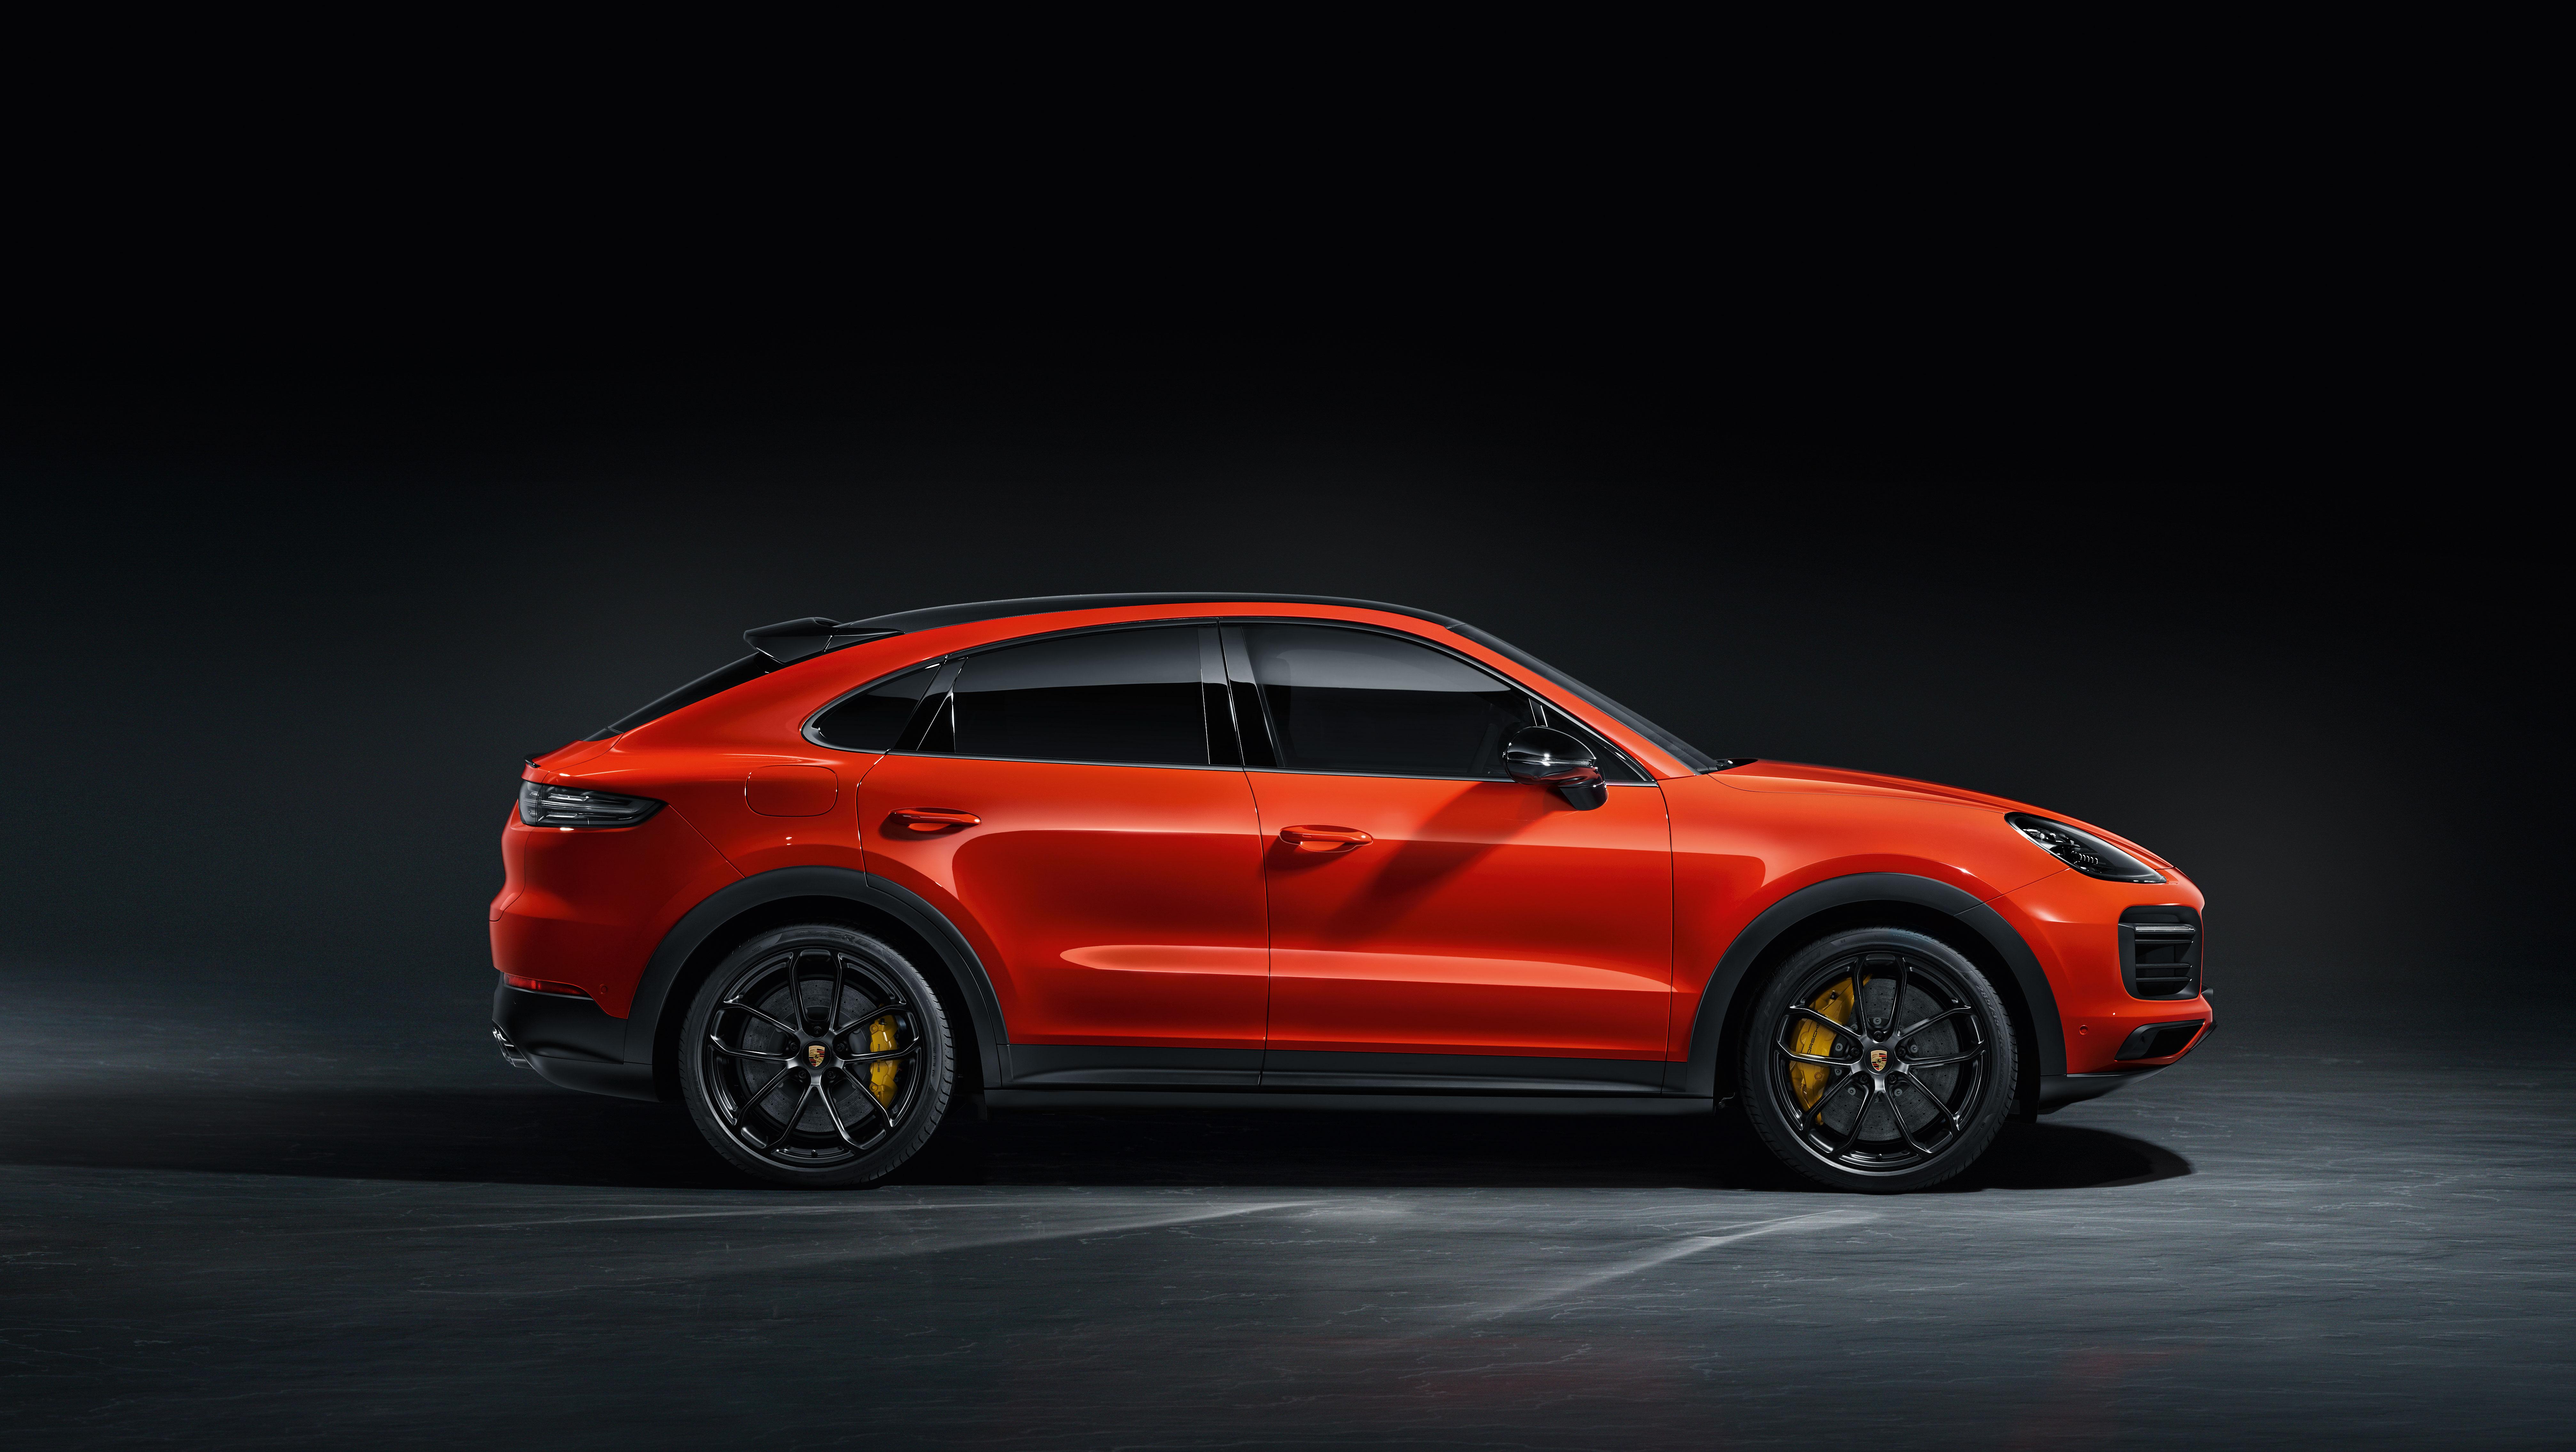 Wallpaper Of The Day: 2020 Porsche Cayenne Coupe